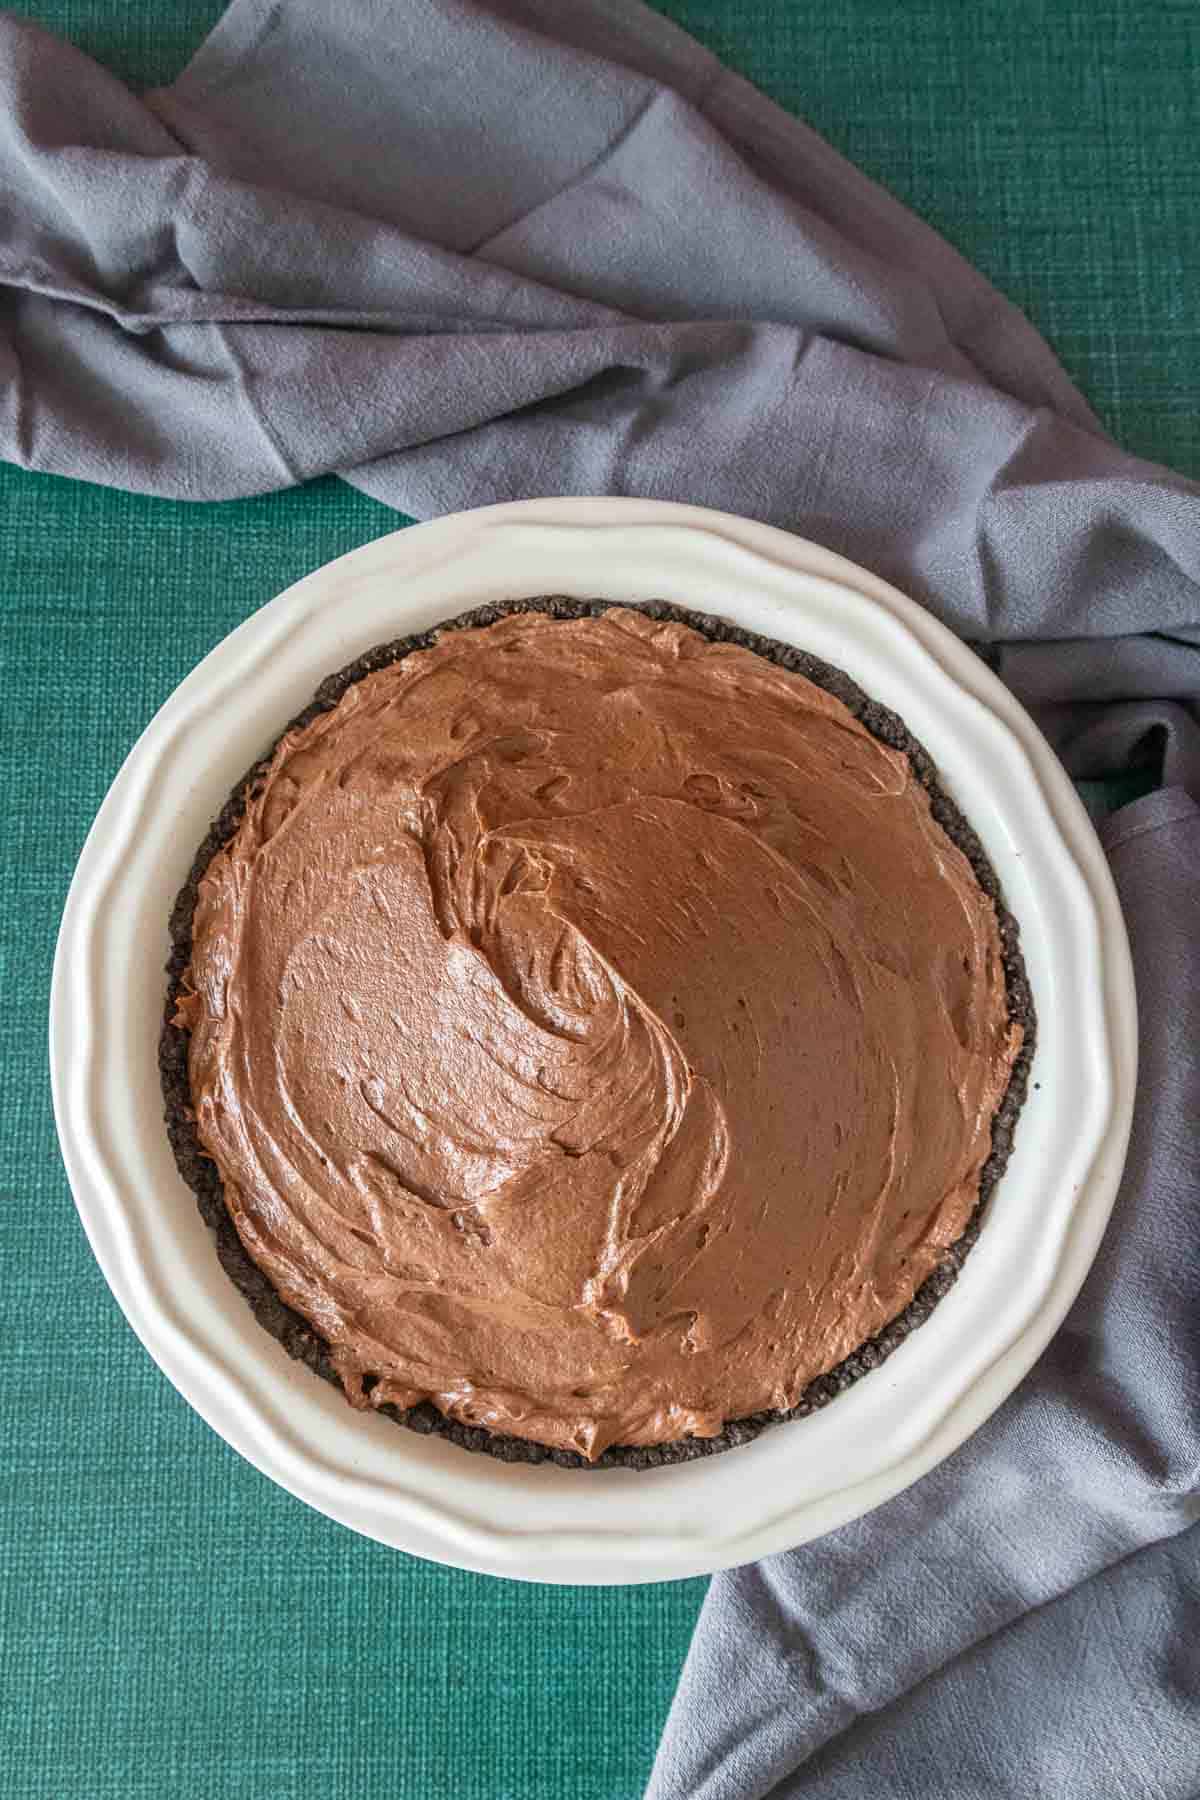 Chocolate peanut butter pie on a green surface with a gray towel.